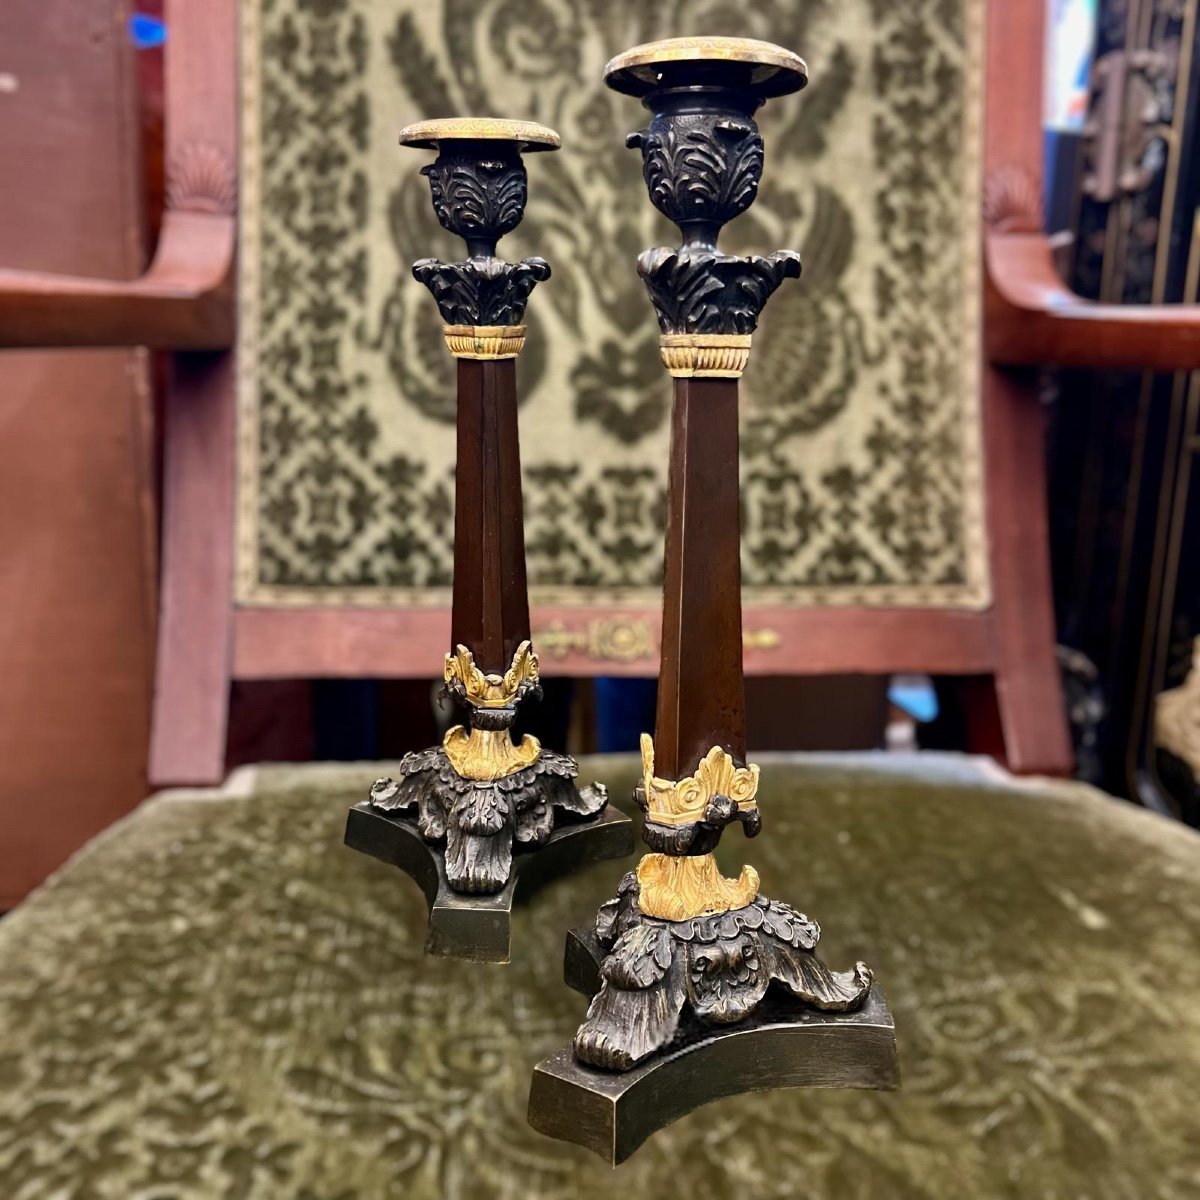 Pair Of Double Patina Bronze Candlesticks From 19th Century Restoration Period -photo-4